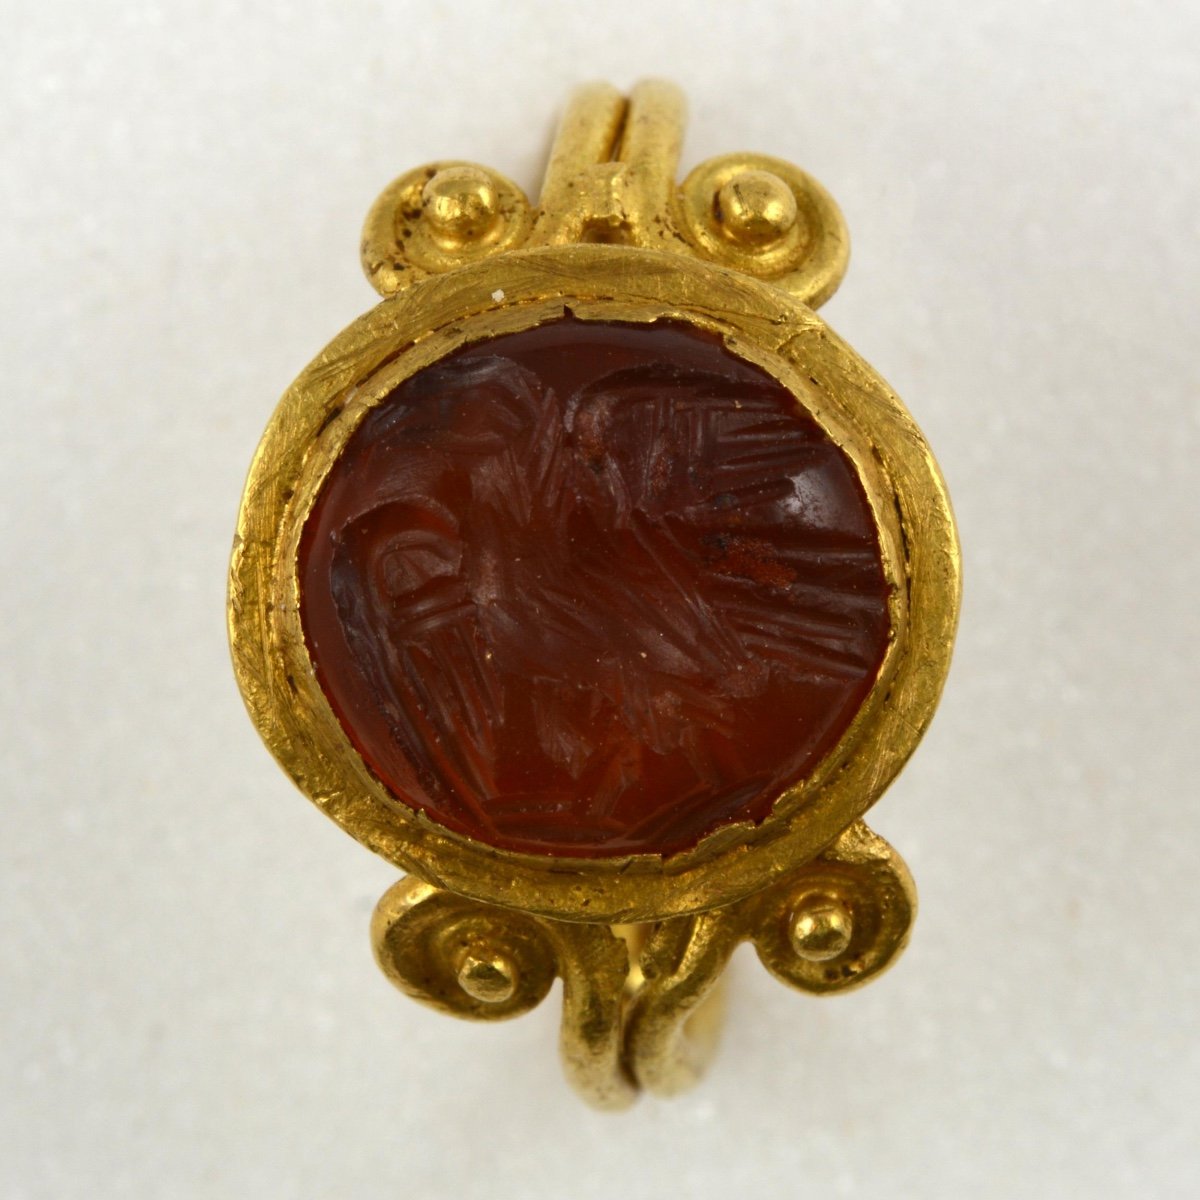 Ancient Gold Ring With An Agate Intaglio Of A Fly. Roman, 2nd - 3rd Century Ad.-photo-7